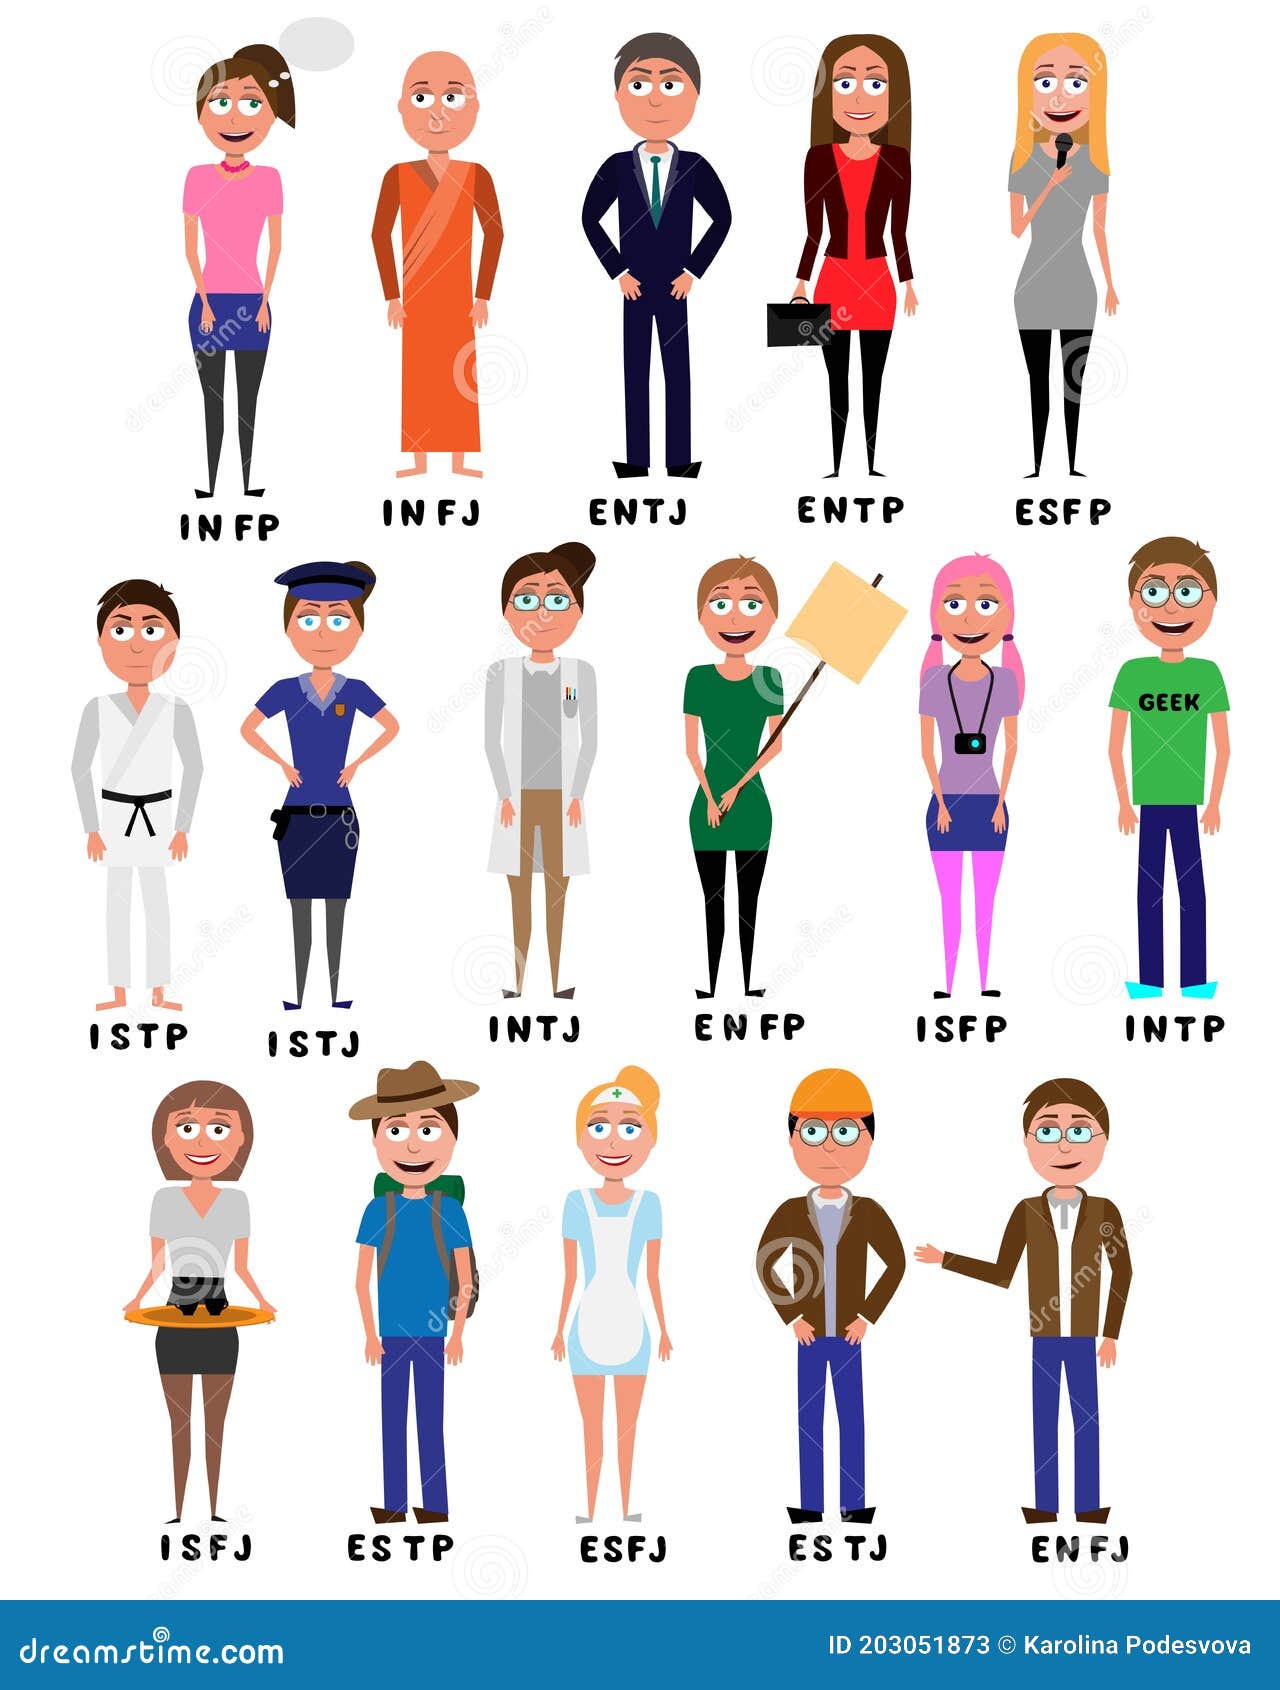 Z MBTI Personality Type: ISFJ or ISFP?